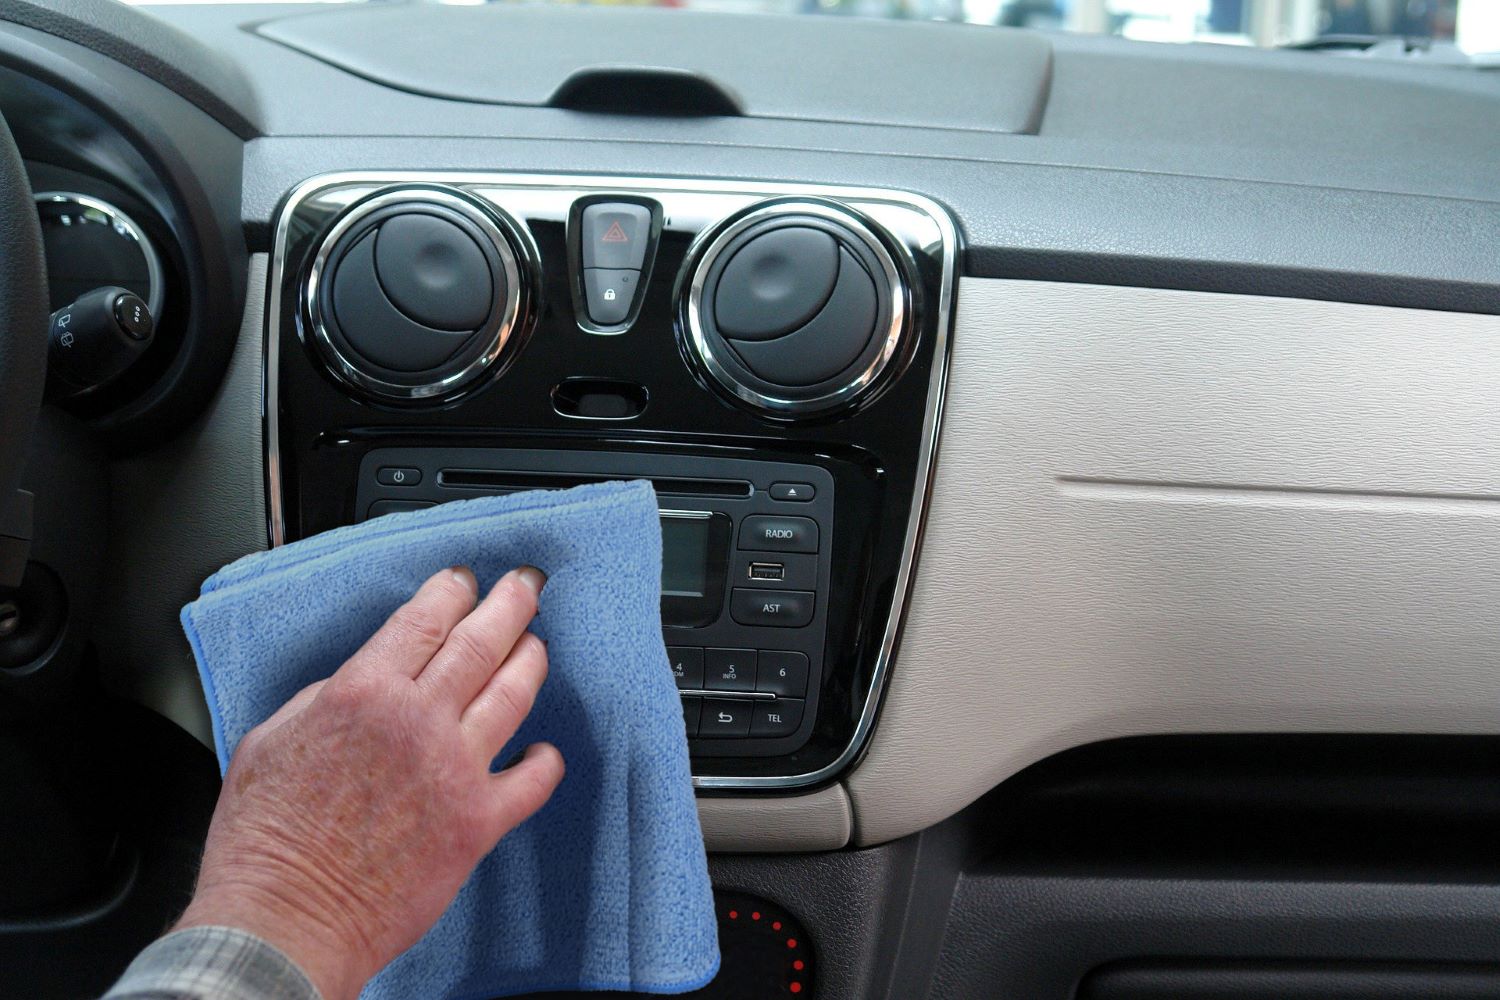 How To Clean Your Microfiber Towels For Your Car & Detailing – GloveBox